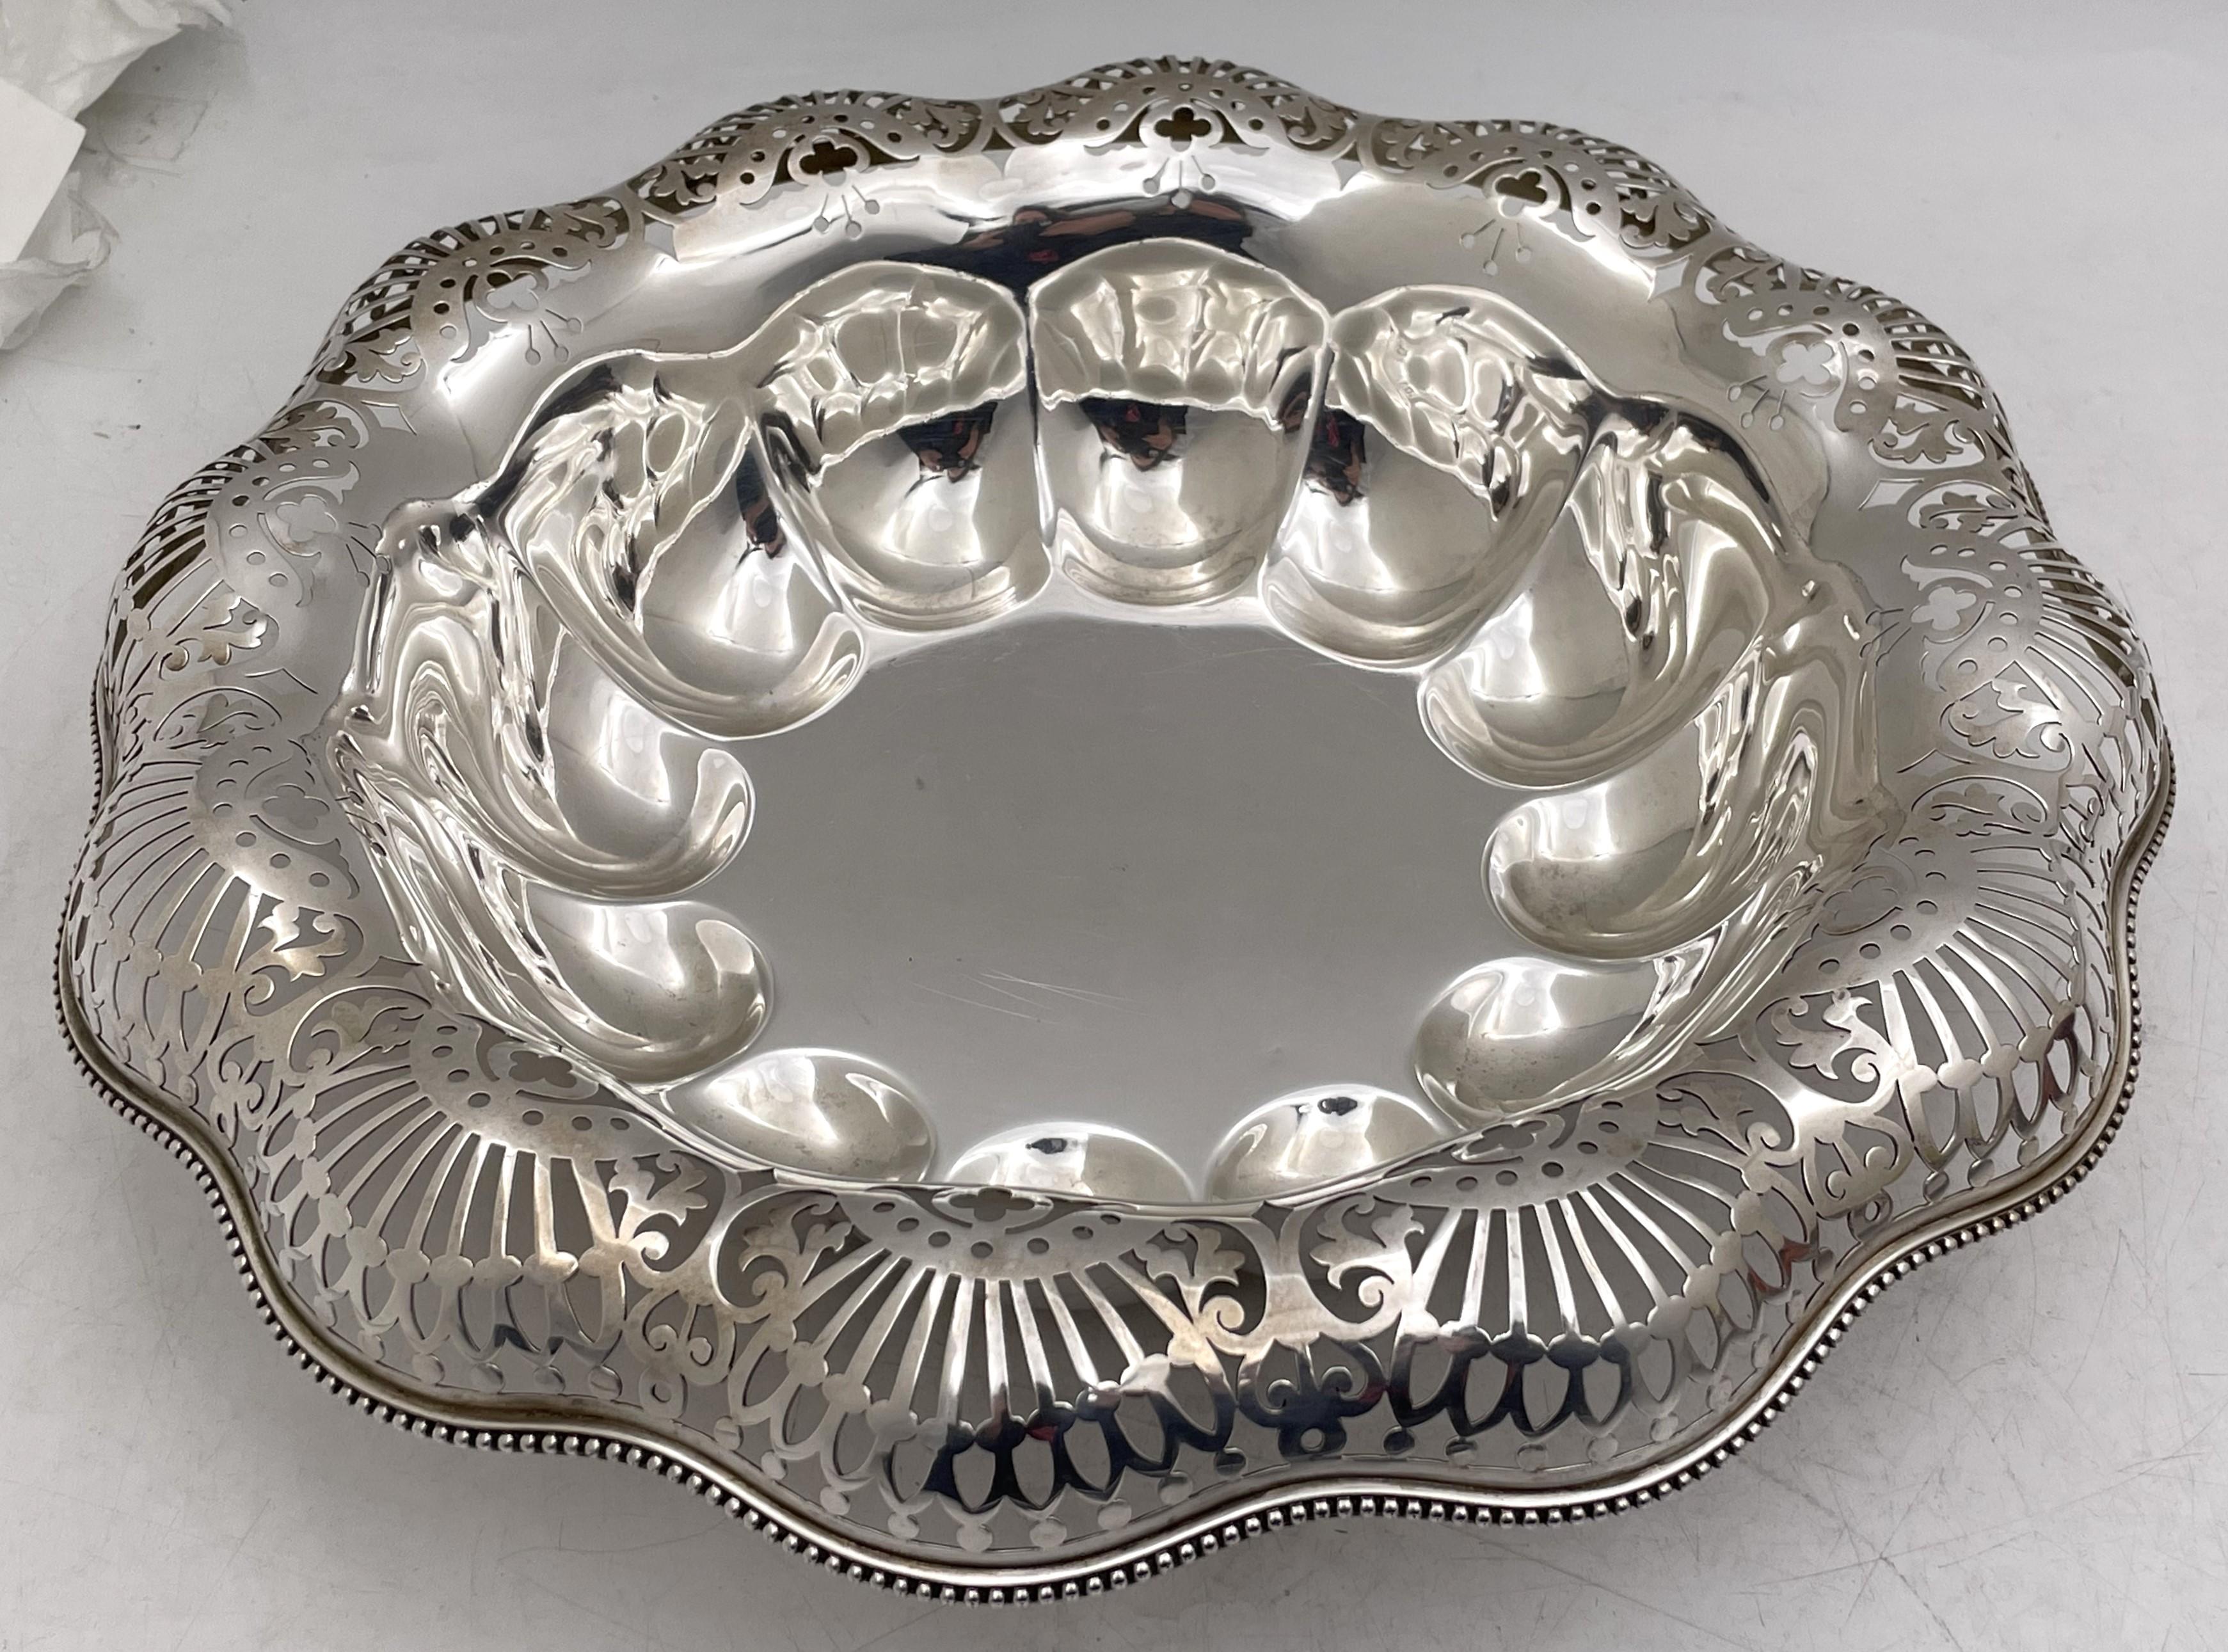 Dominick & Haff sterling silver multilobed centerpiece bowl from 1887, showcasing stylized geometric pierced motifs on the rim. It measures 13'' in diameter by 3 1/4'' in height, weighs 25.5 troy ounces, and bears hallmarks as shown. 

Dominick &